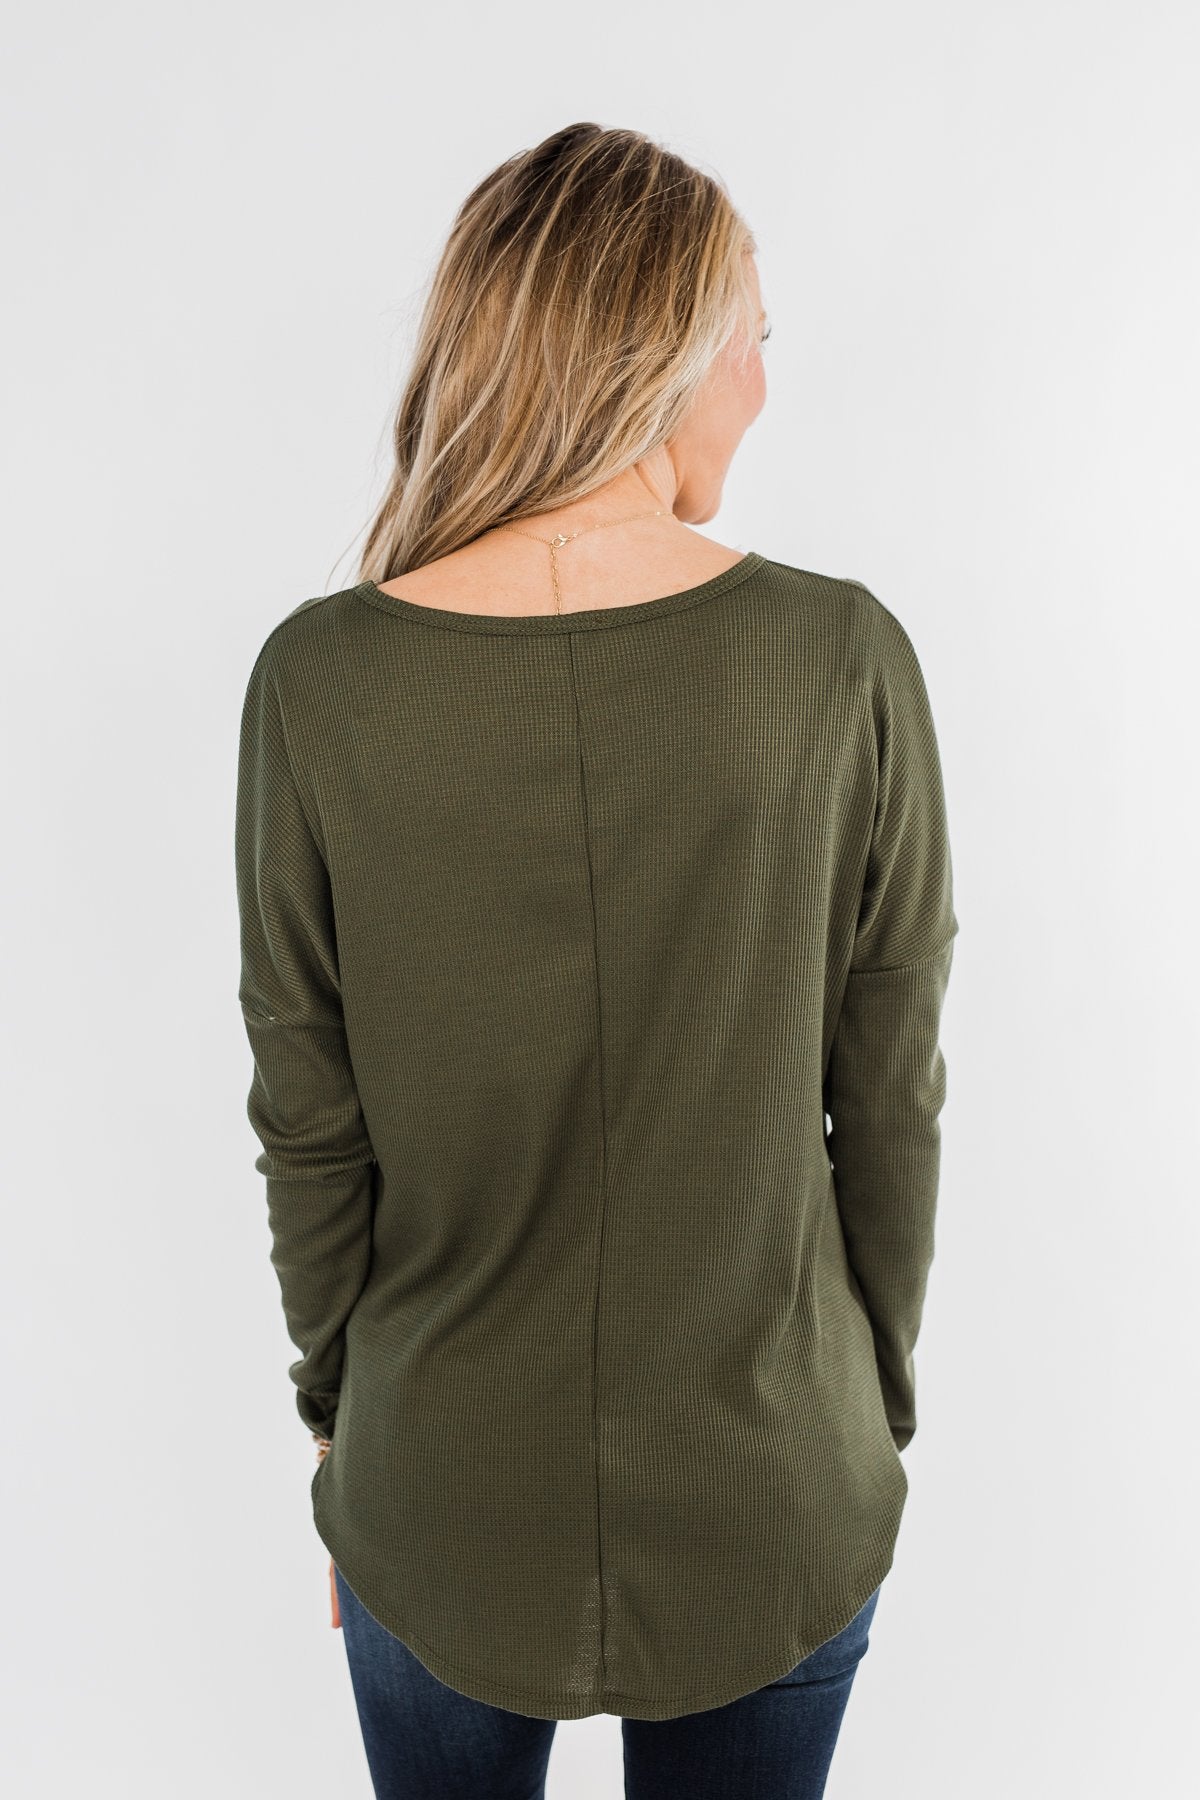 In Your Arms Thermal Twist Top- Olive – The Pulse Boutique